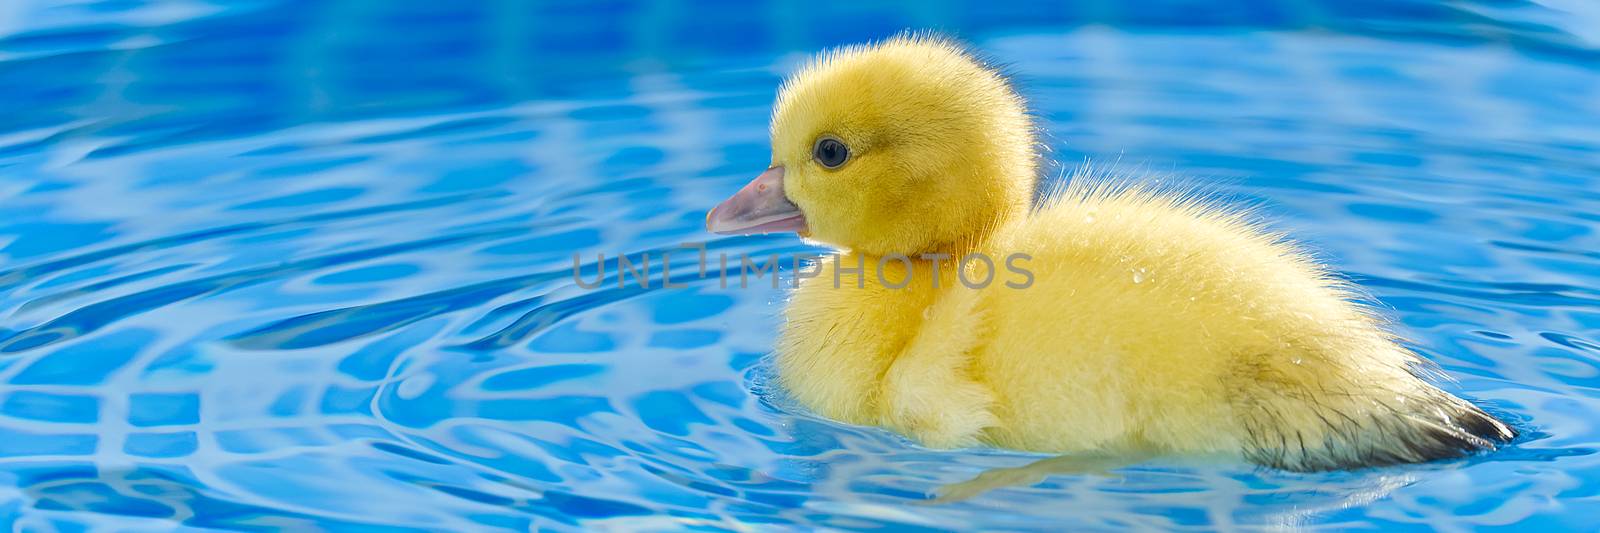 Yellow small cute duckling in swimming pool. Duckling swimming in crystal clear blue water sunny summer day